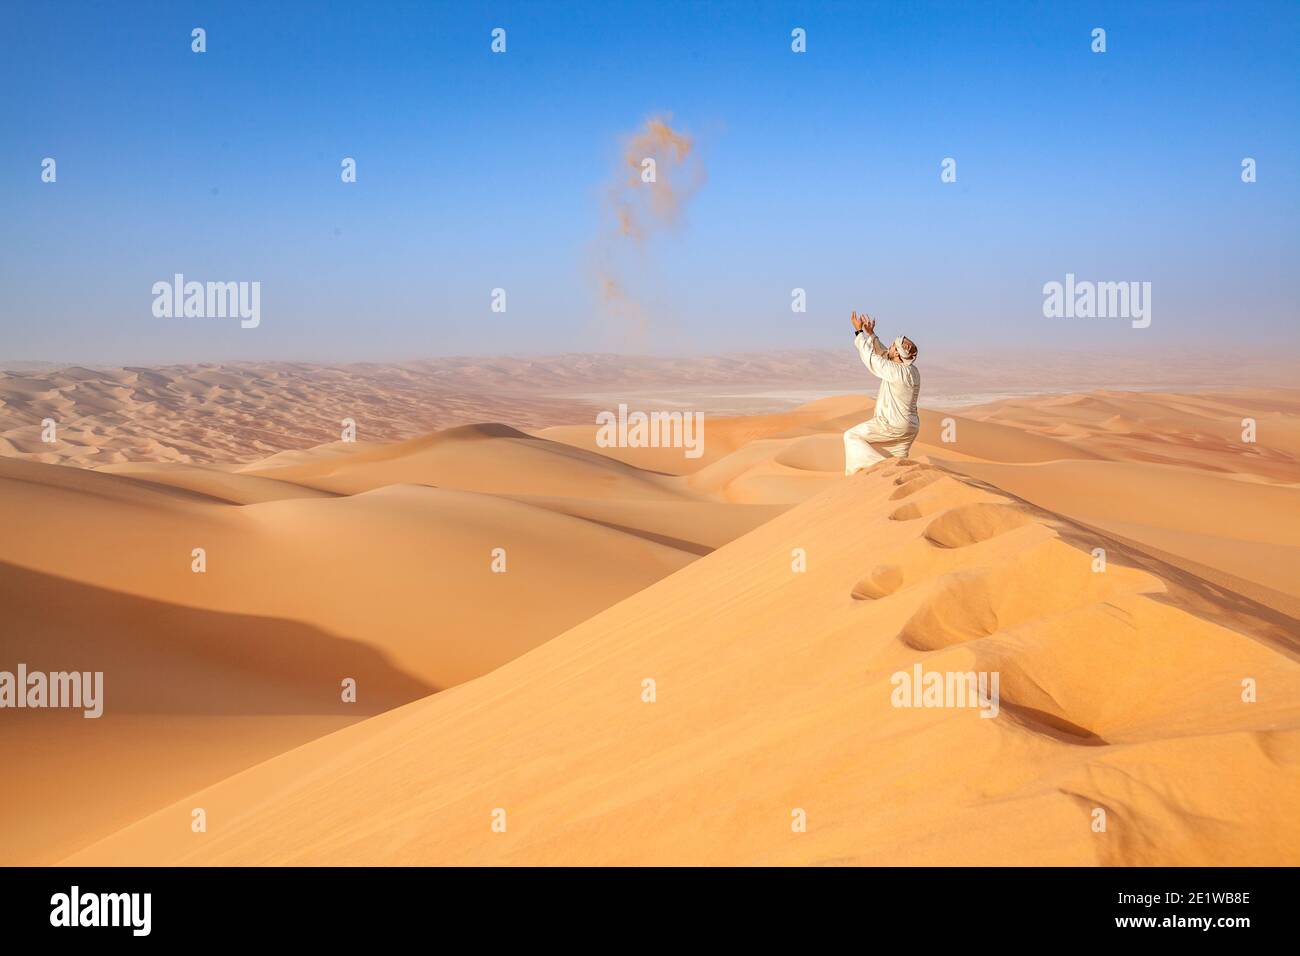 Man in traditional omani outfit throwing sand over a sand dune in the arabian desert Stock Photo